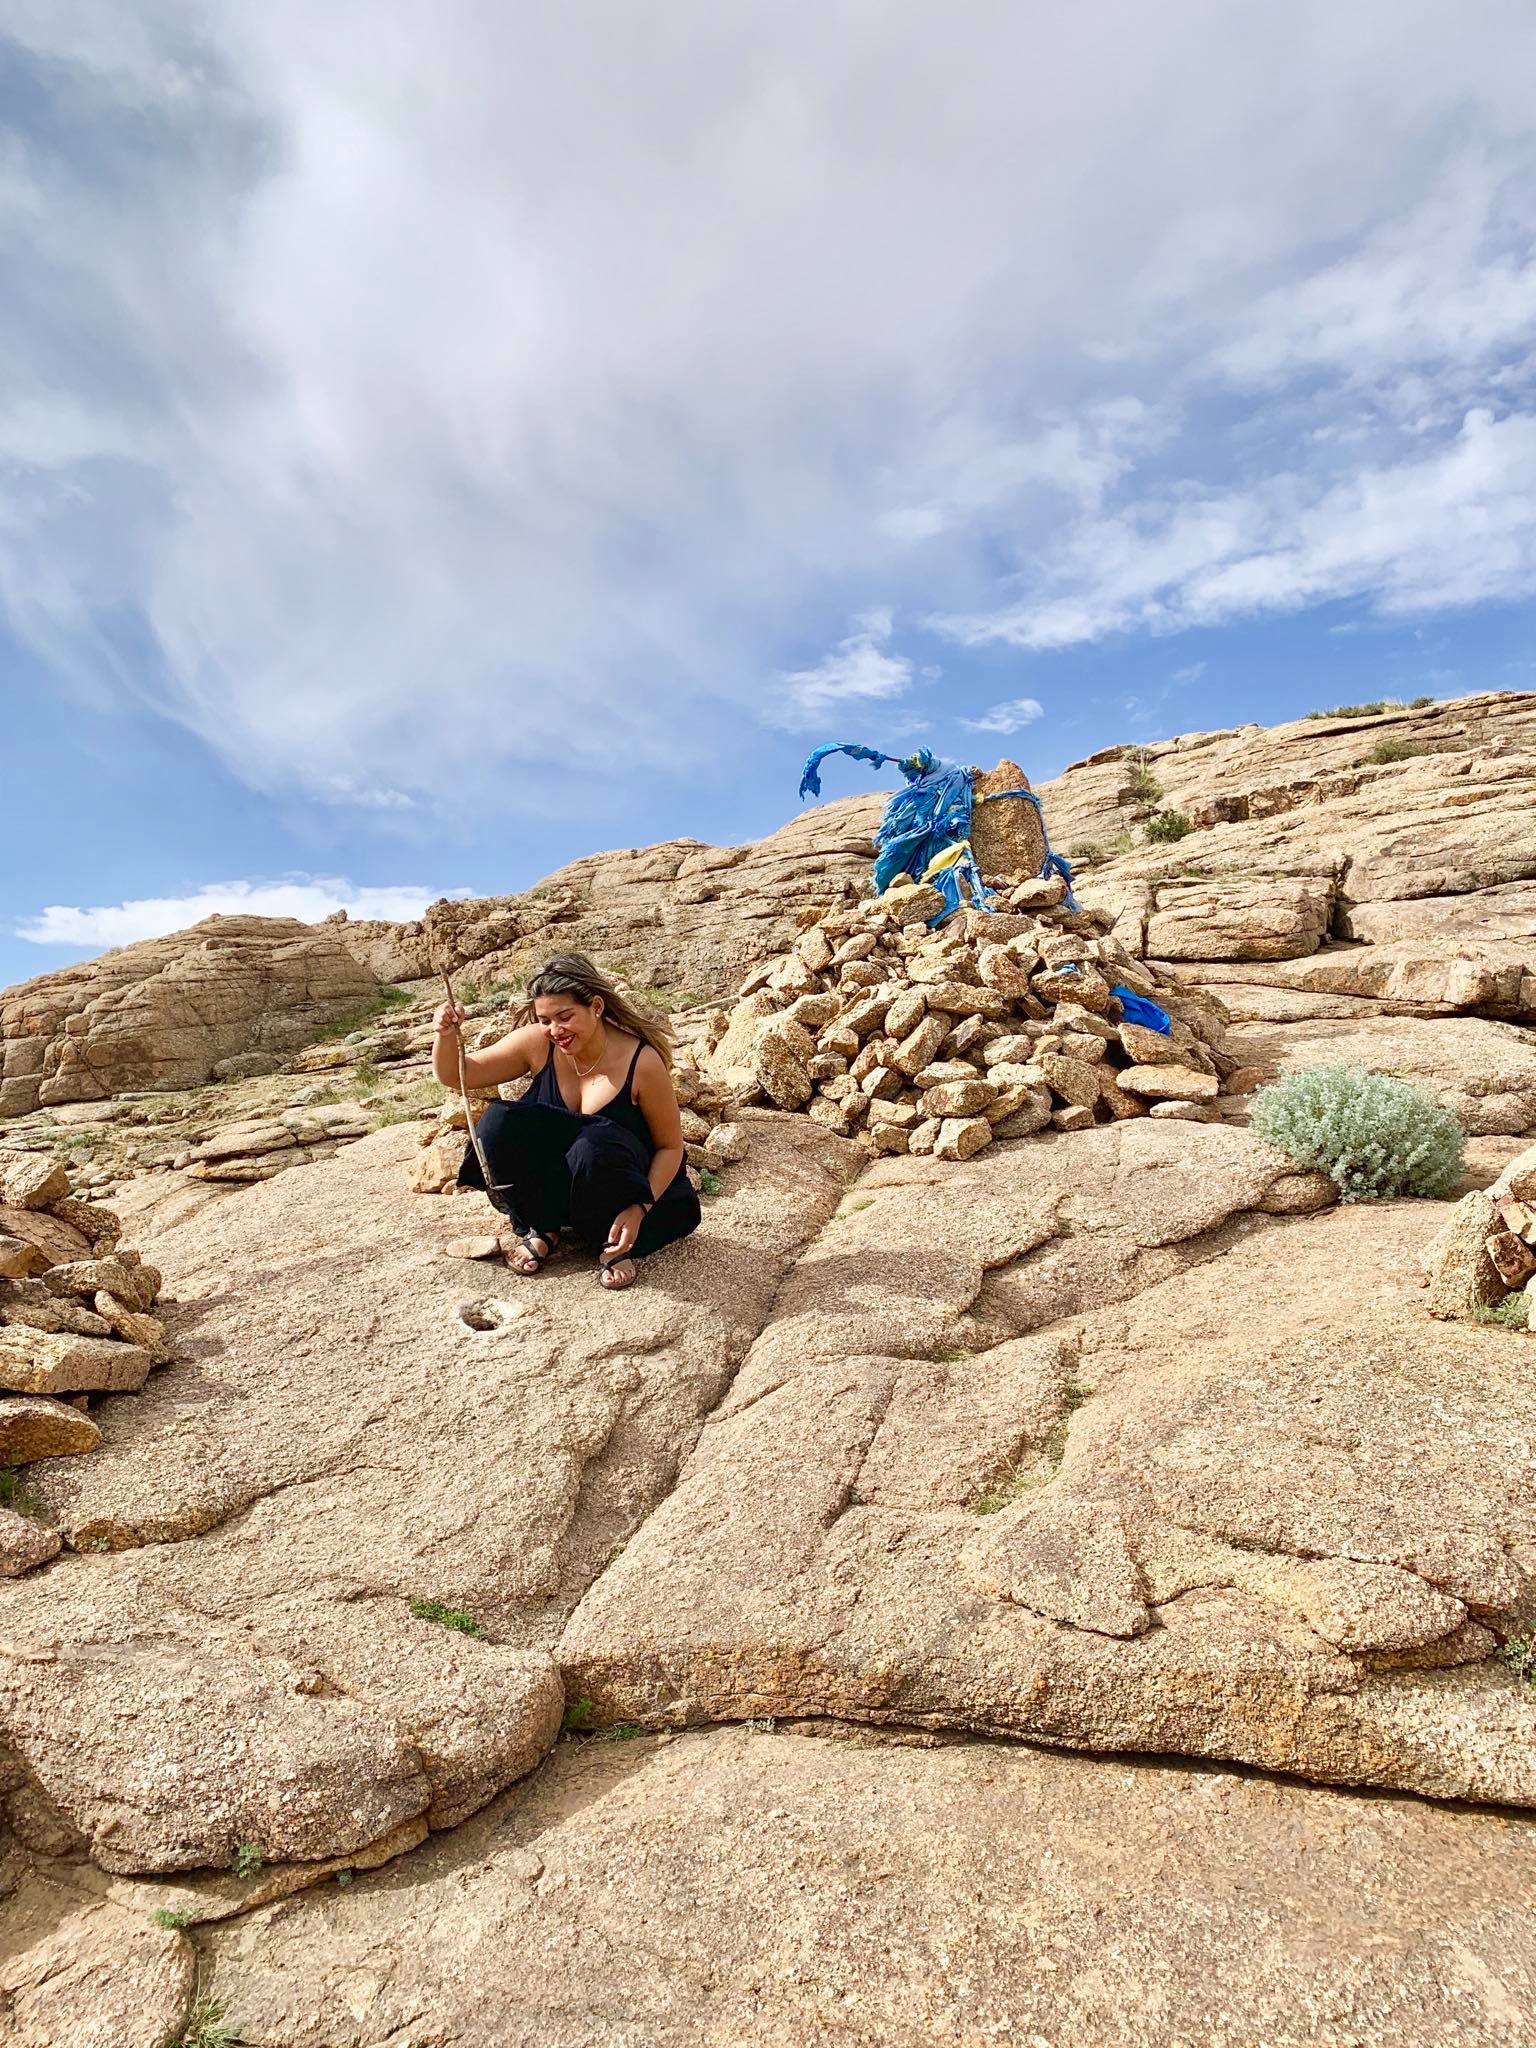 Kach Solo Travels in 2019 One of the hikes during my trip in Gobi desert5.jpg